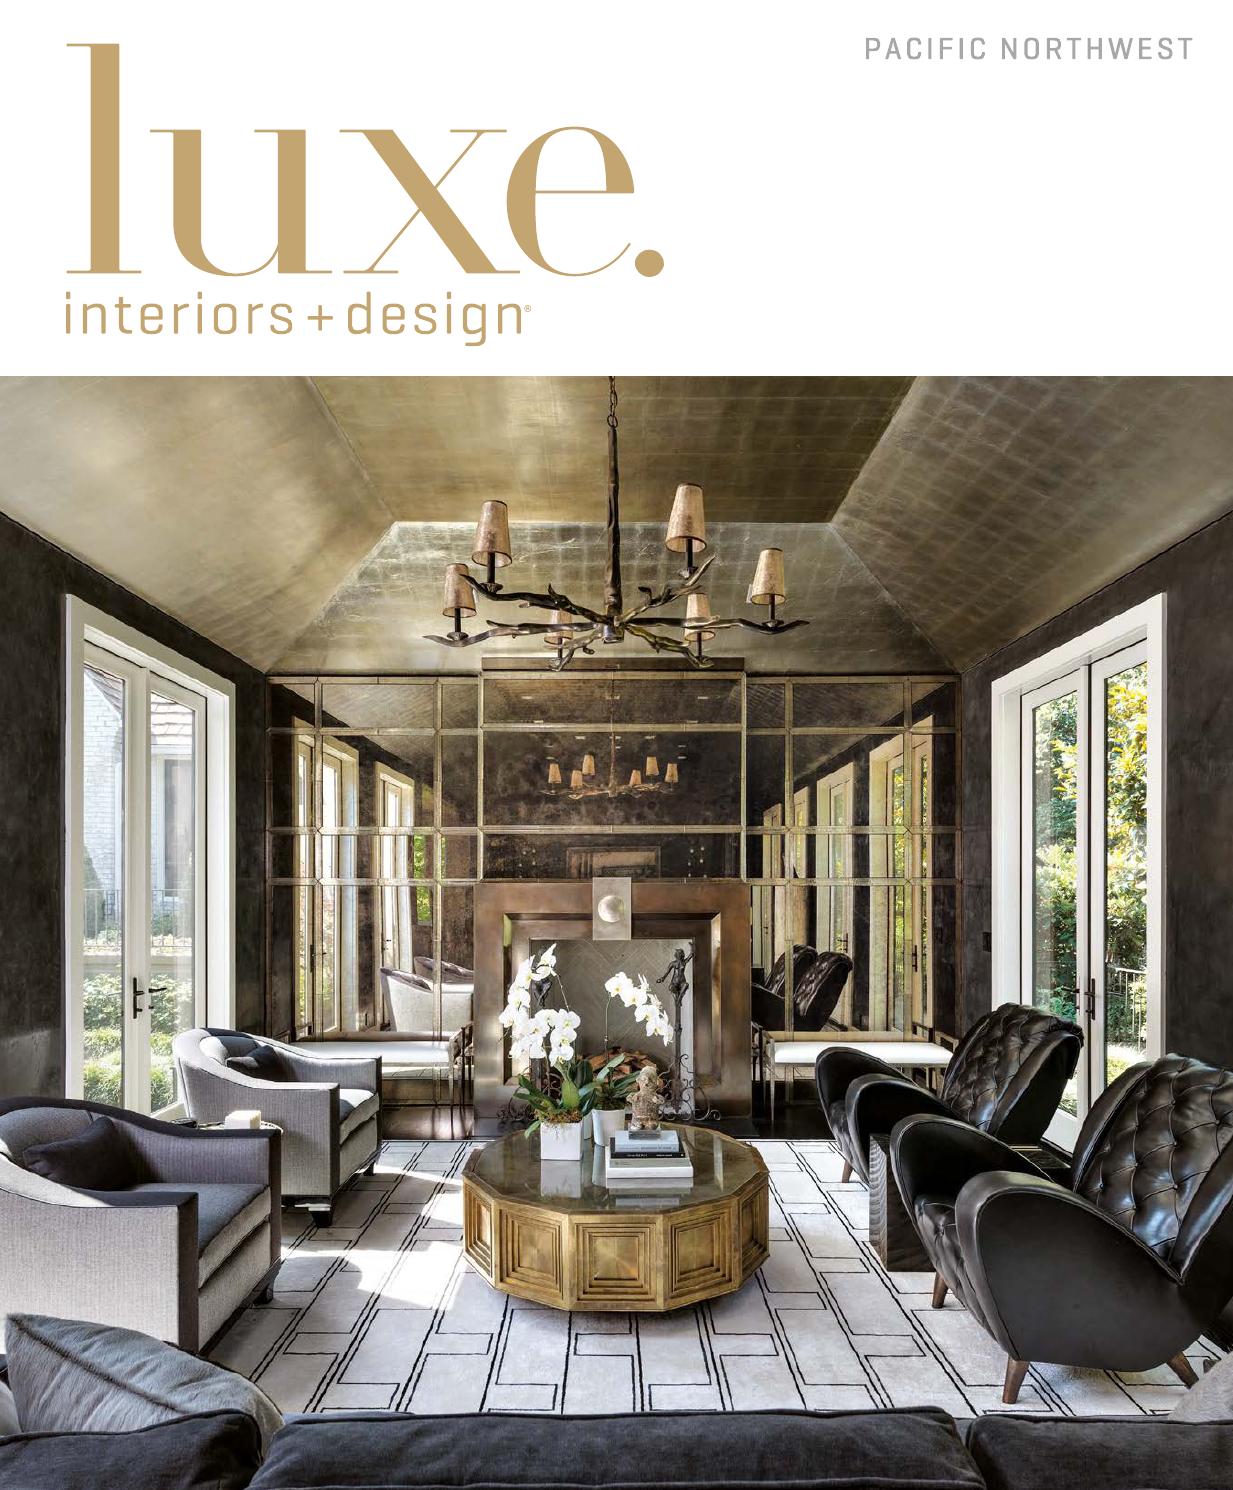 Natick Fireplace Beautiful Luxe Magazine September 2015 Pacific northwest by Sandow